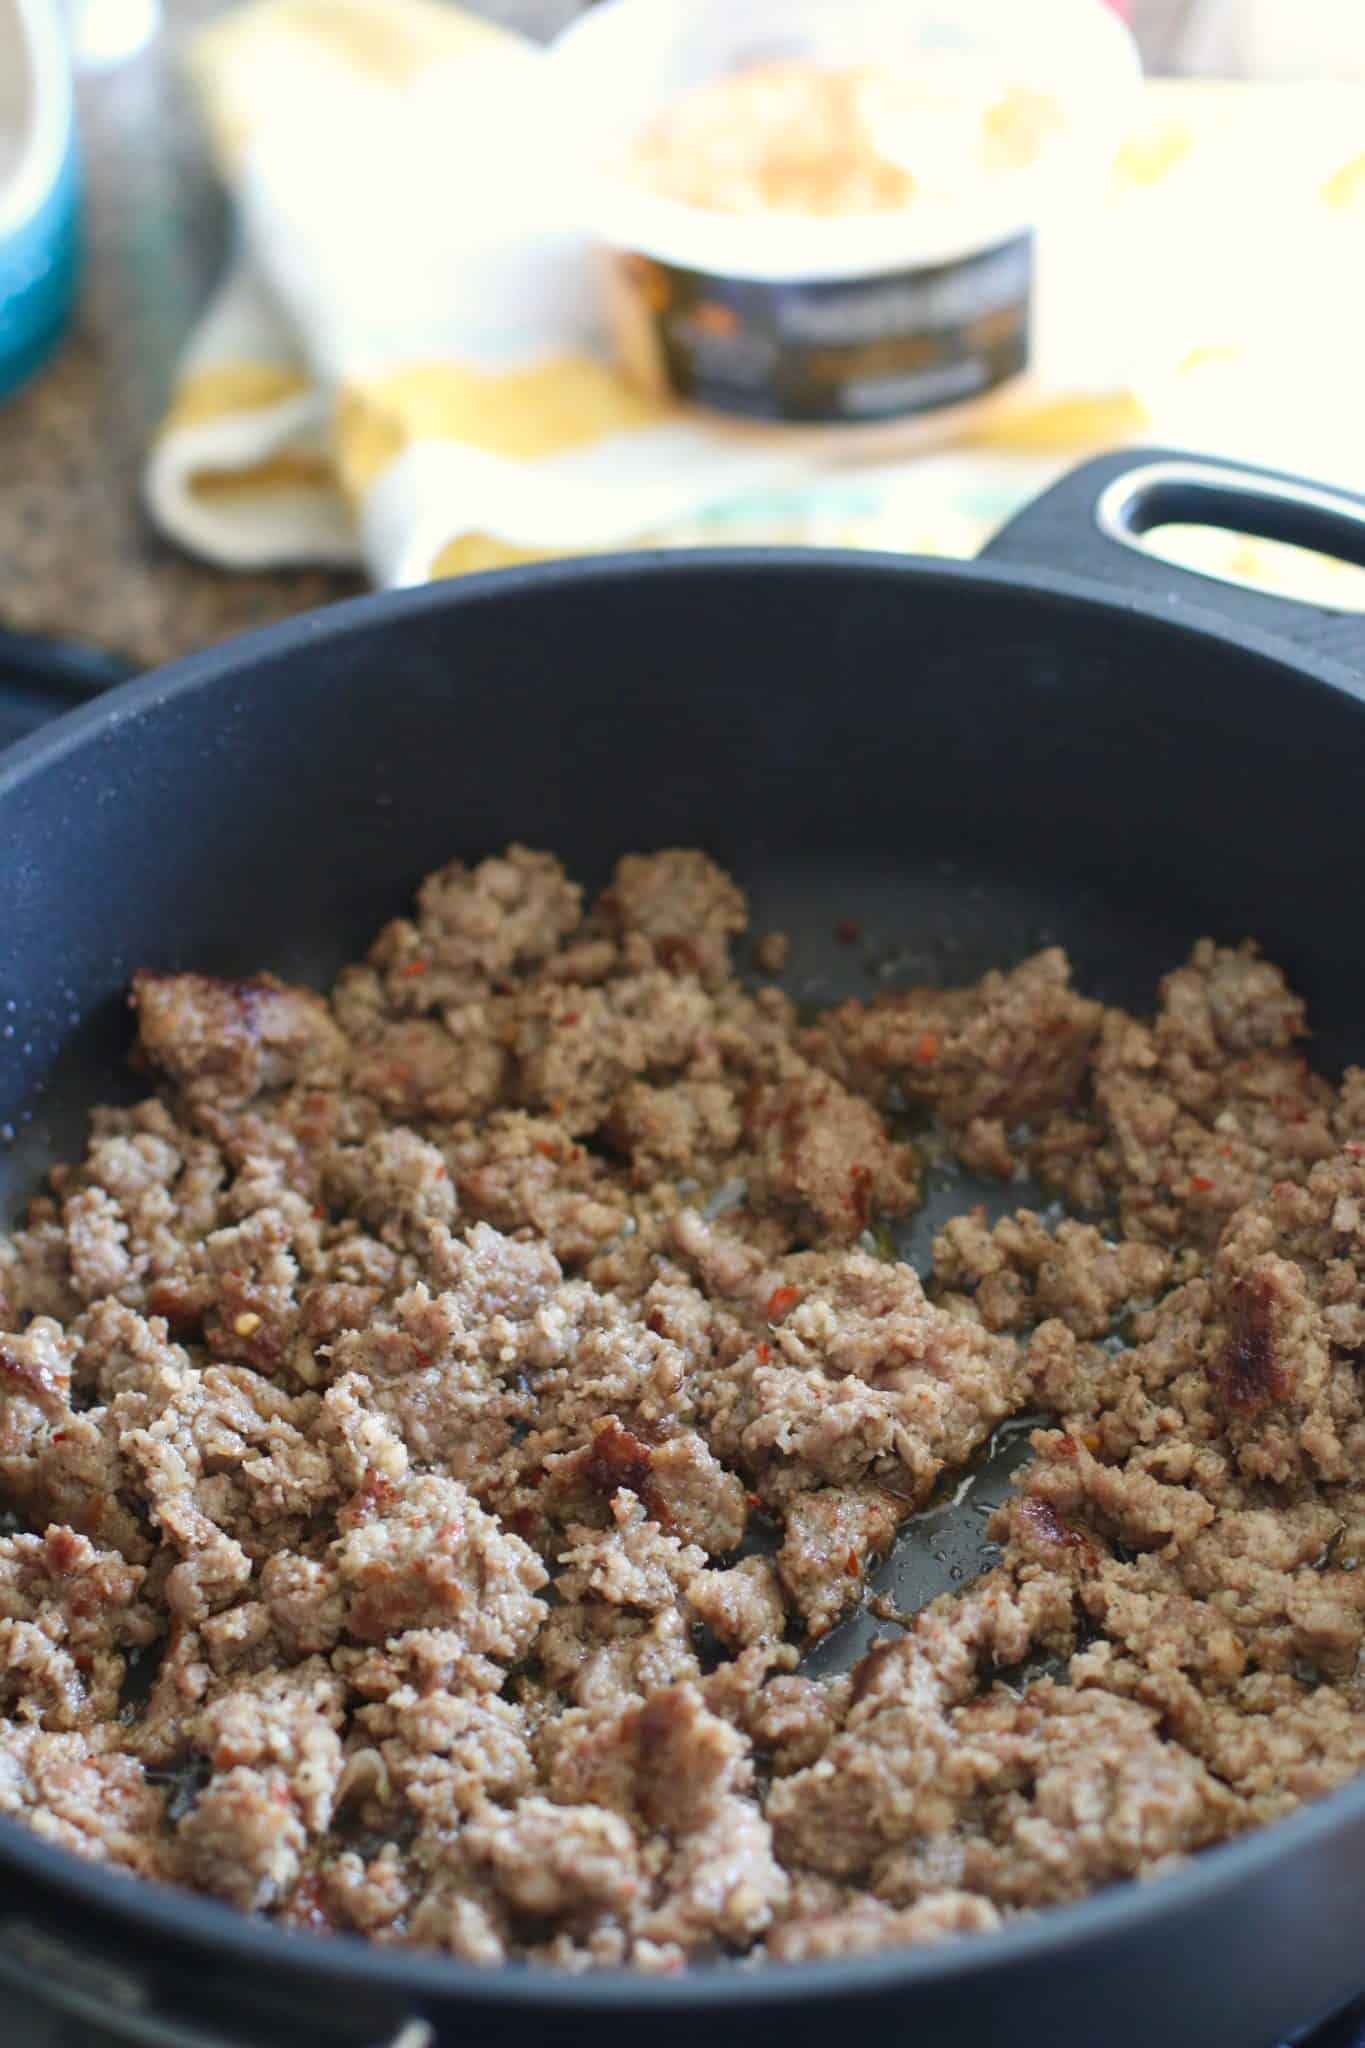 cooked ground crumbled sausage in a skillet.